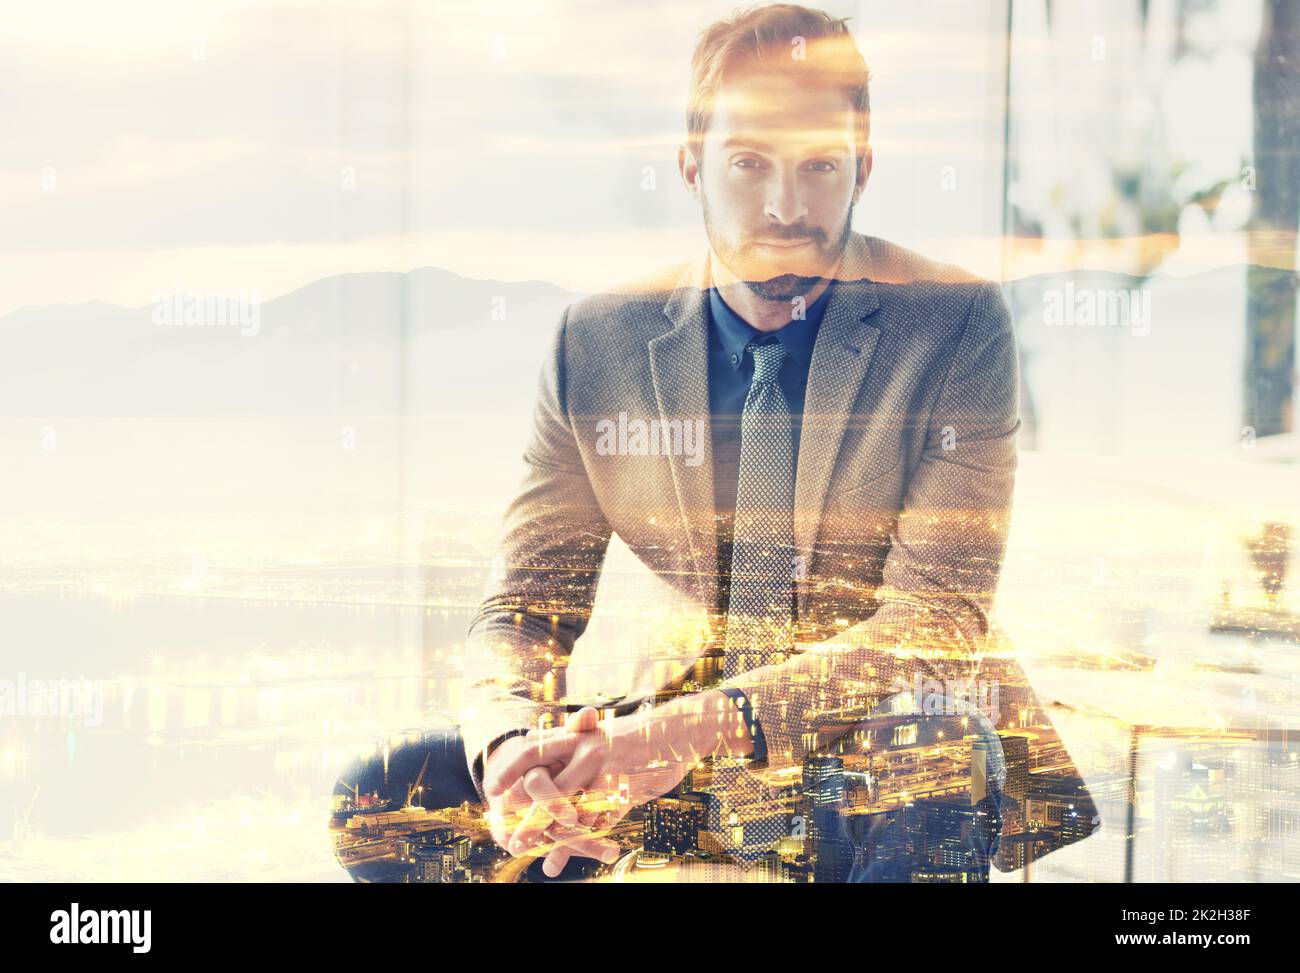 Life in the city. Composite image of a well-dressed man superimposed on an image of a city at night. Stock Photo